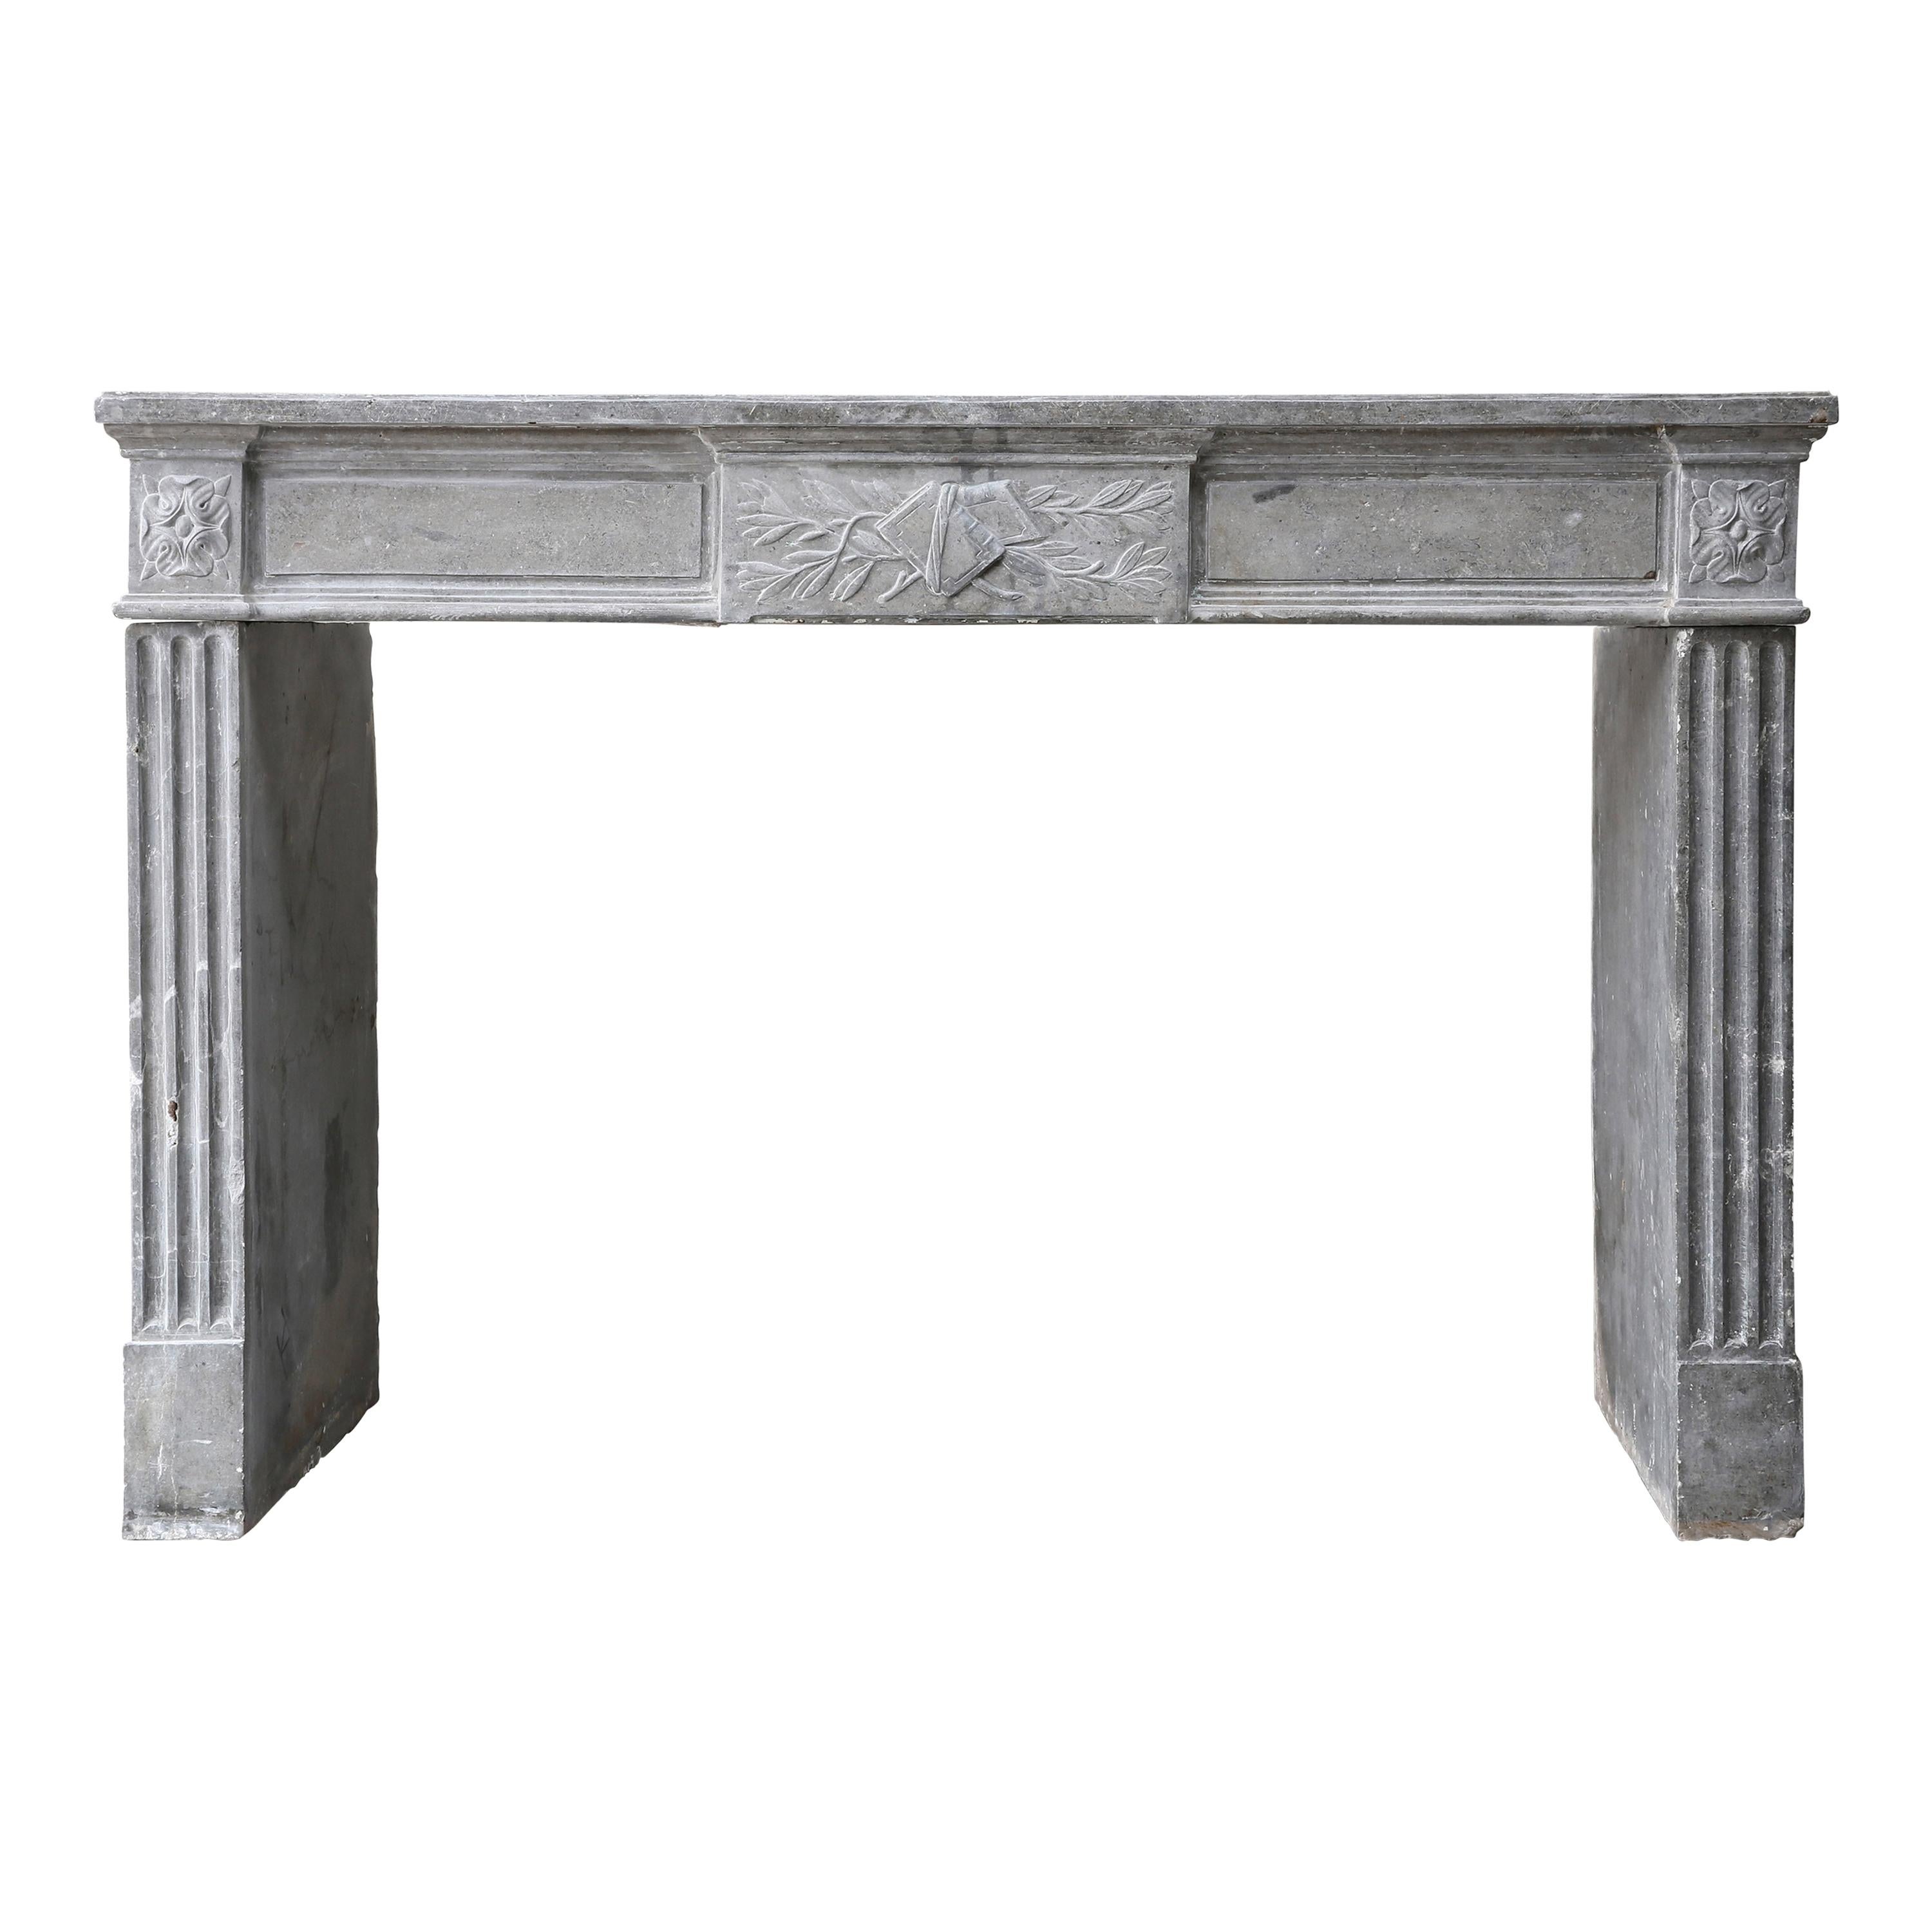 18th Century Antique Fireplace of Gray Marble Stone in Style of Louis XVI